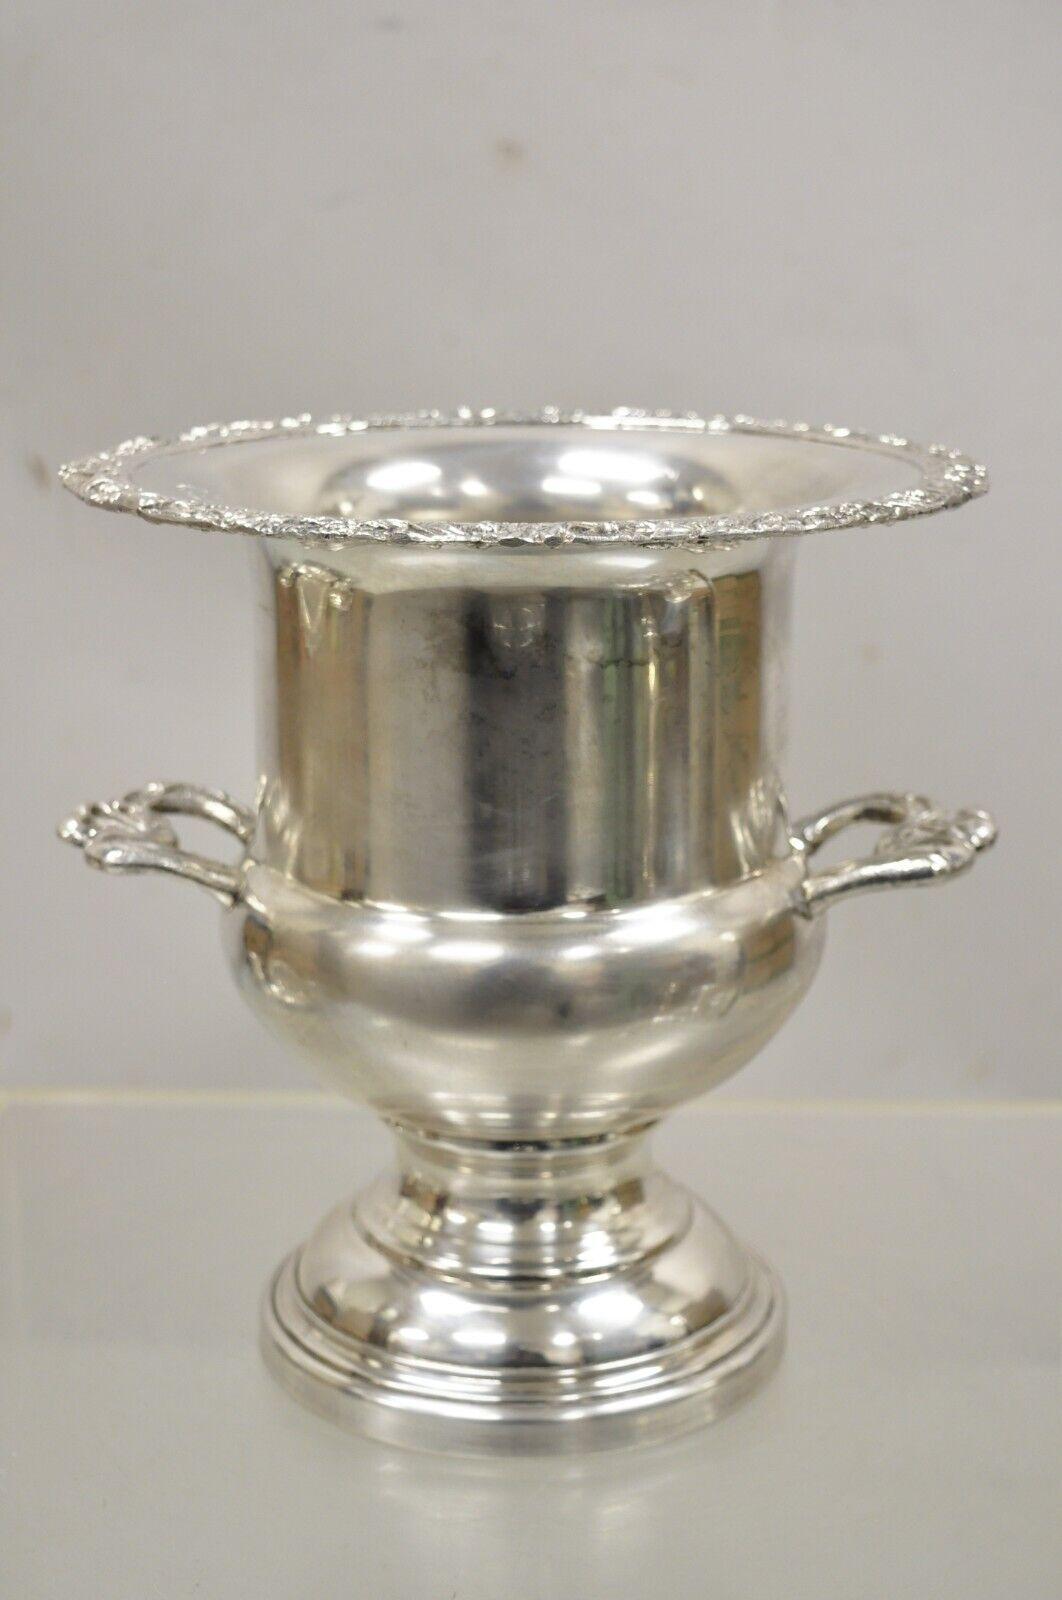 W&S Blackinton ice chiller wine champagne bucket silver plated trophy cup. Item features ornate twin handles, decorated rim, trophy cup form, original label, very nice vintage item, circa Mid-20th Century. Measurements: 10